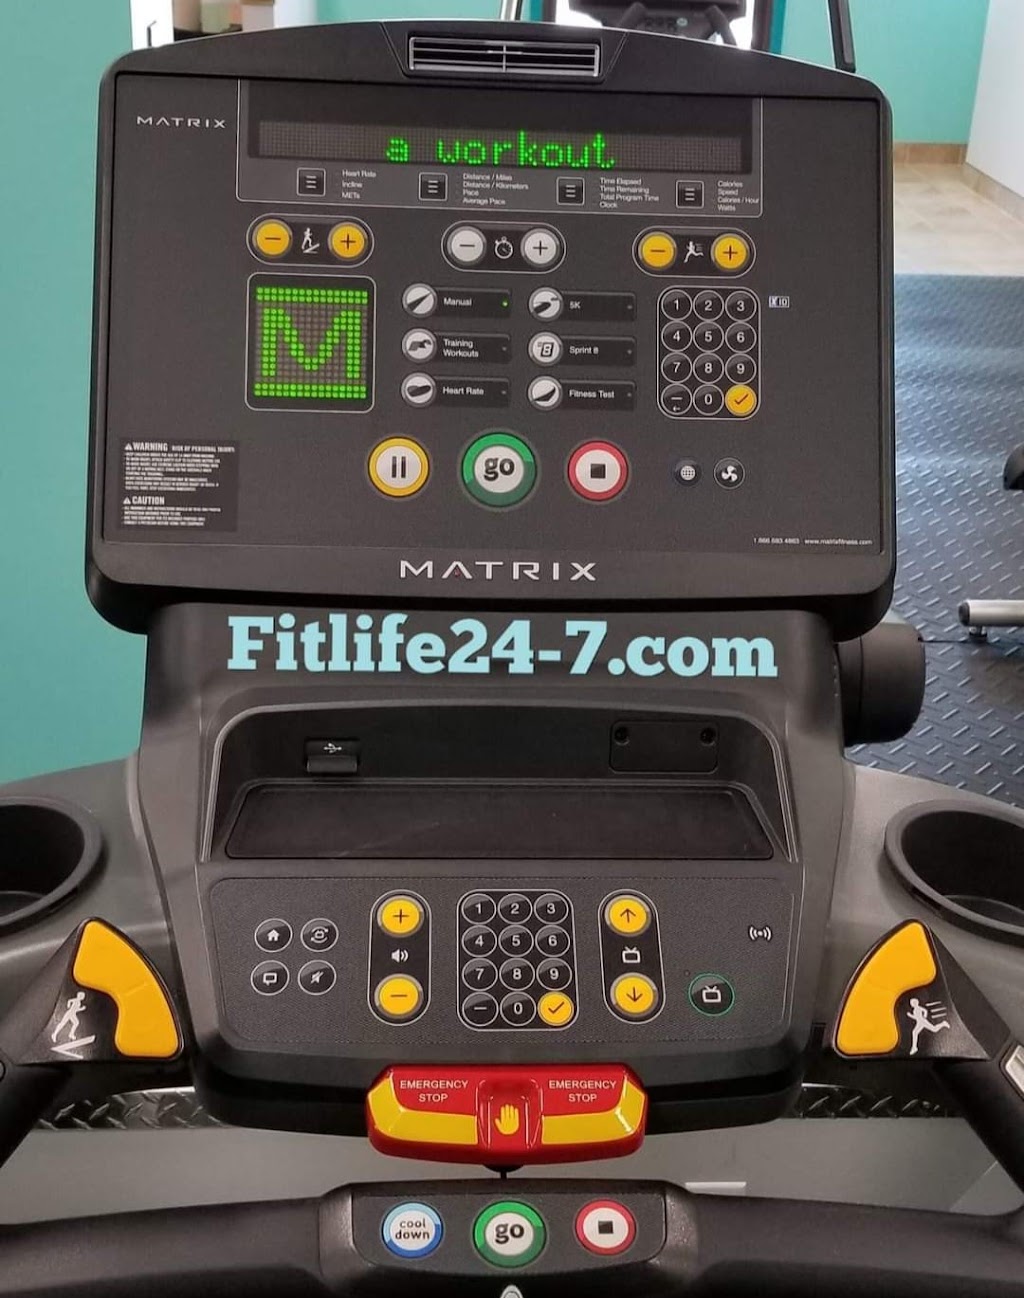 FitLife 24/7 | 991 S Main St, Plantsville, CT 06479 | Phone: (860) 378-6100